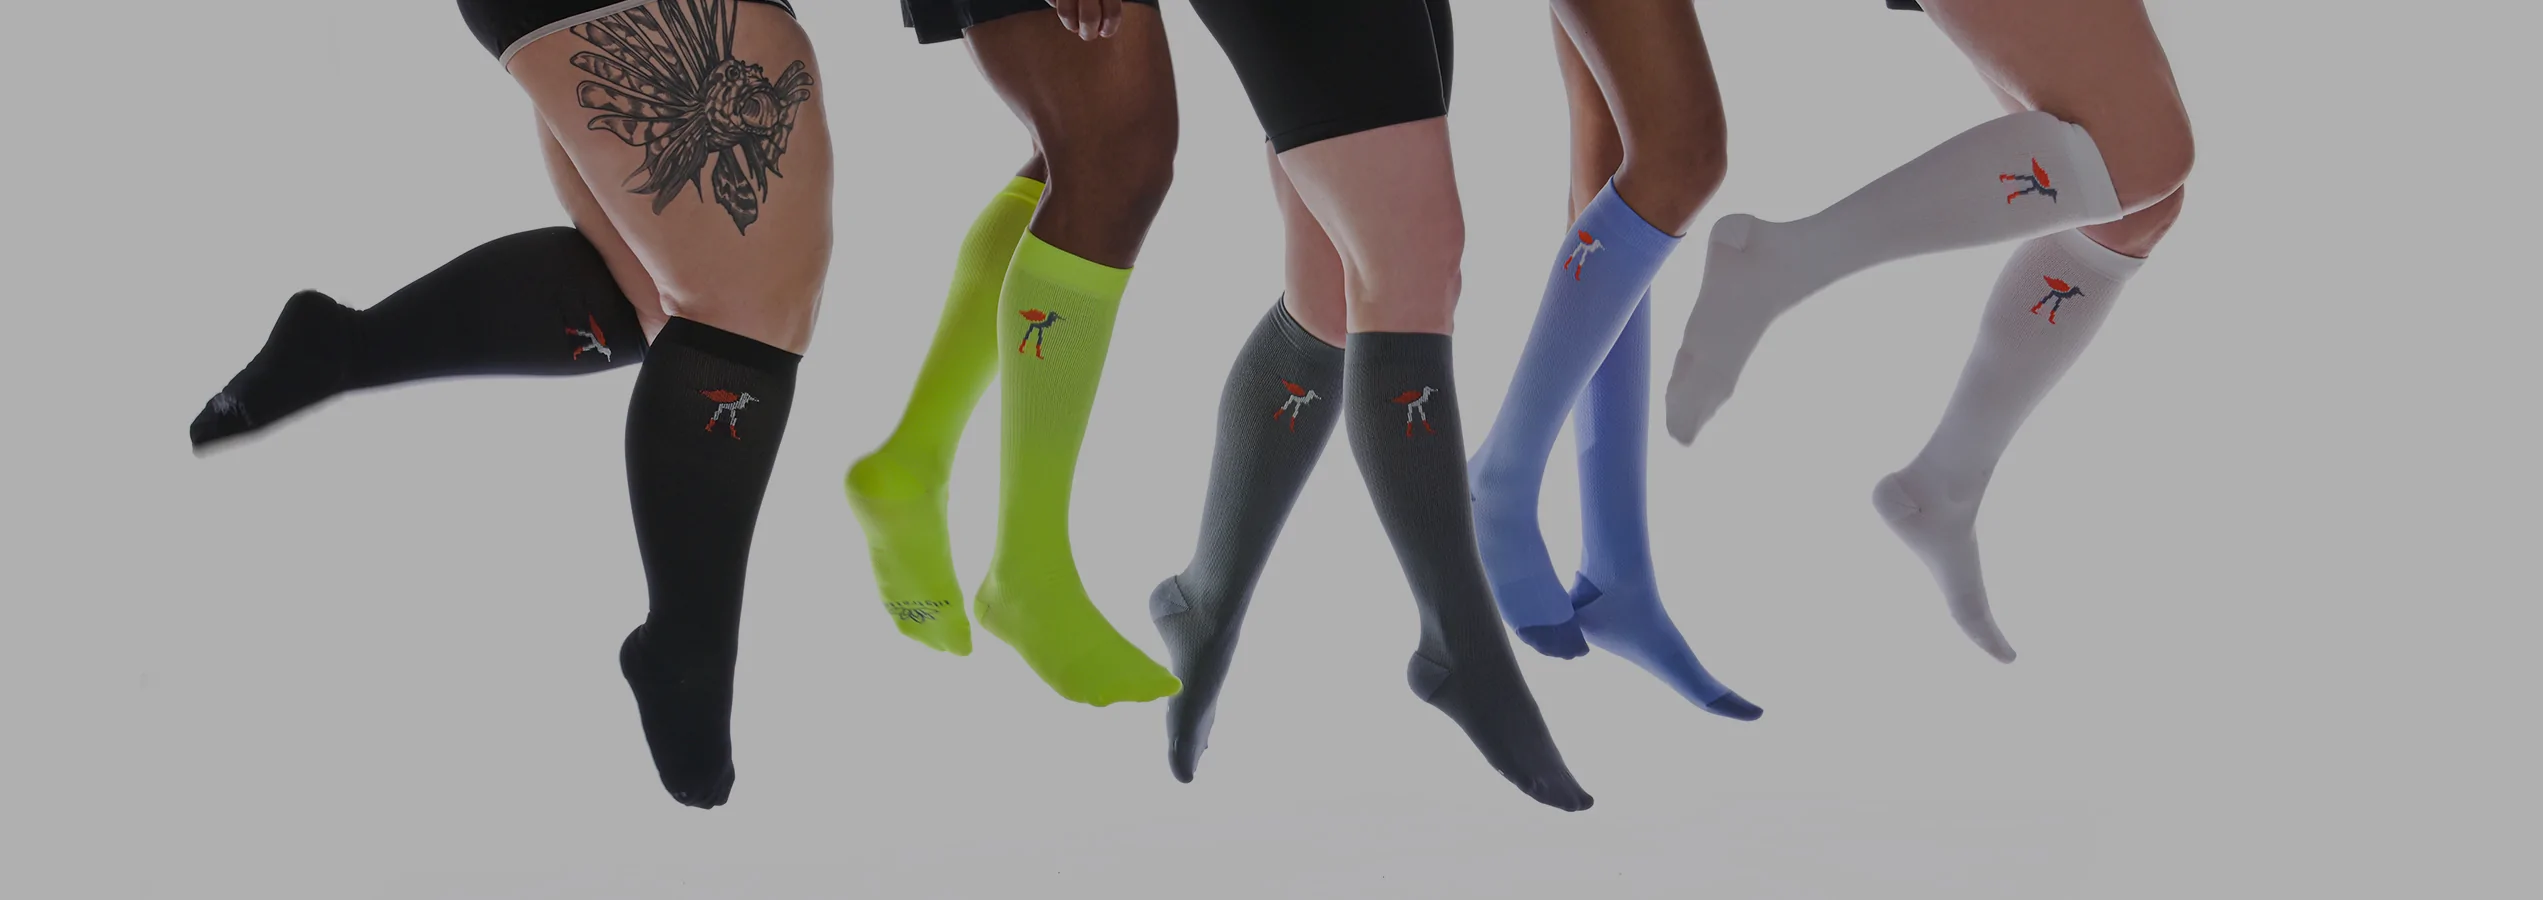 A group of compression-sock-wearing legs float in the air.